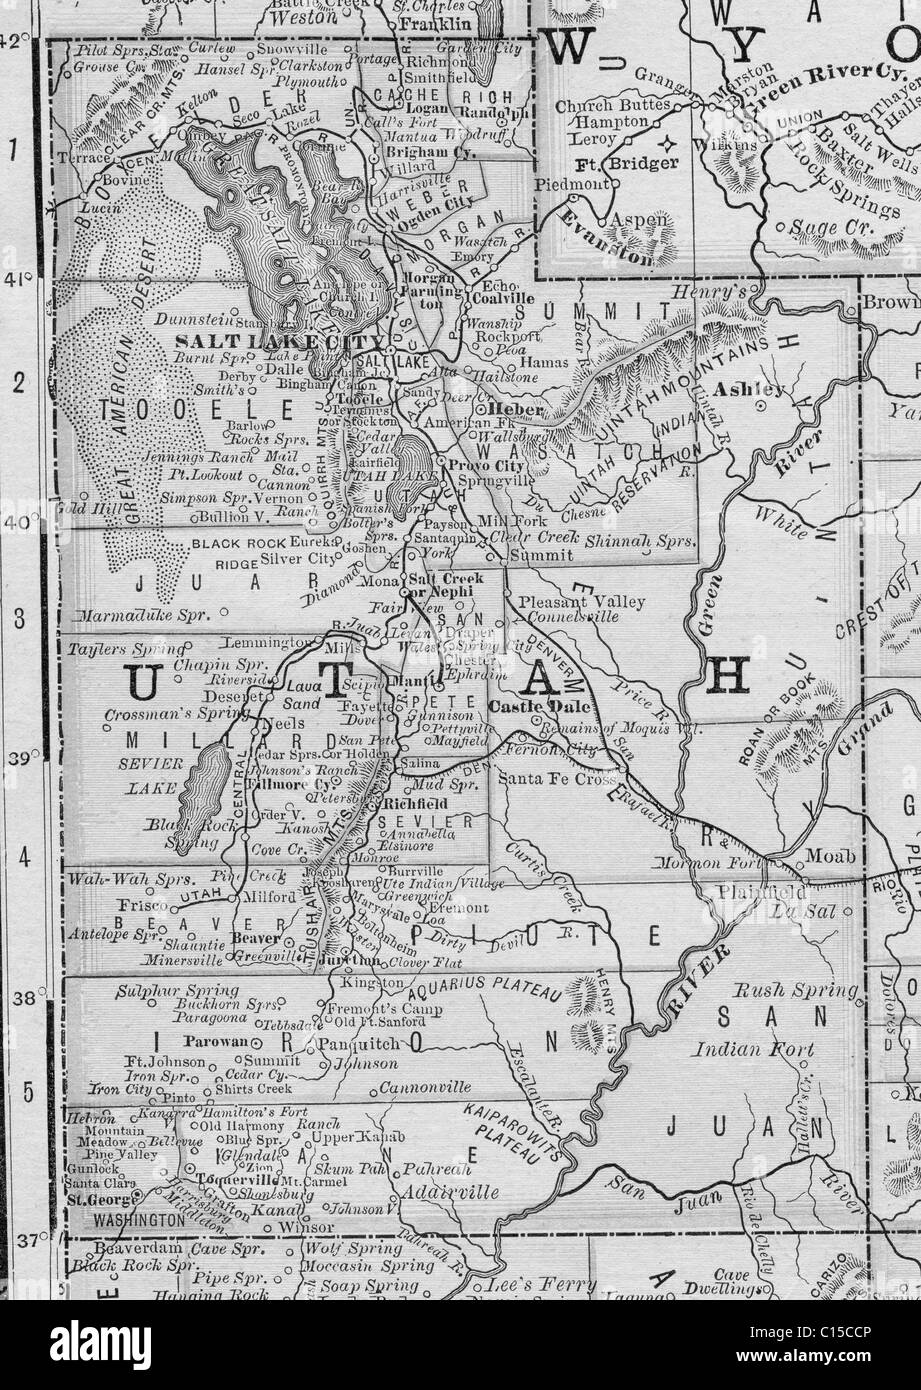 Old map of Utah from original geography textbook, 1884 Stock Photo